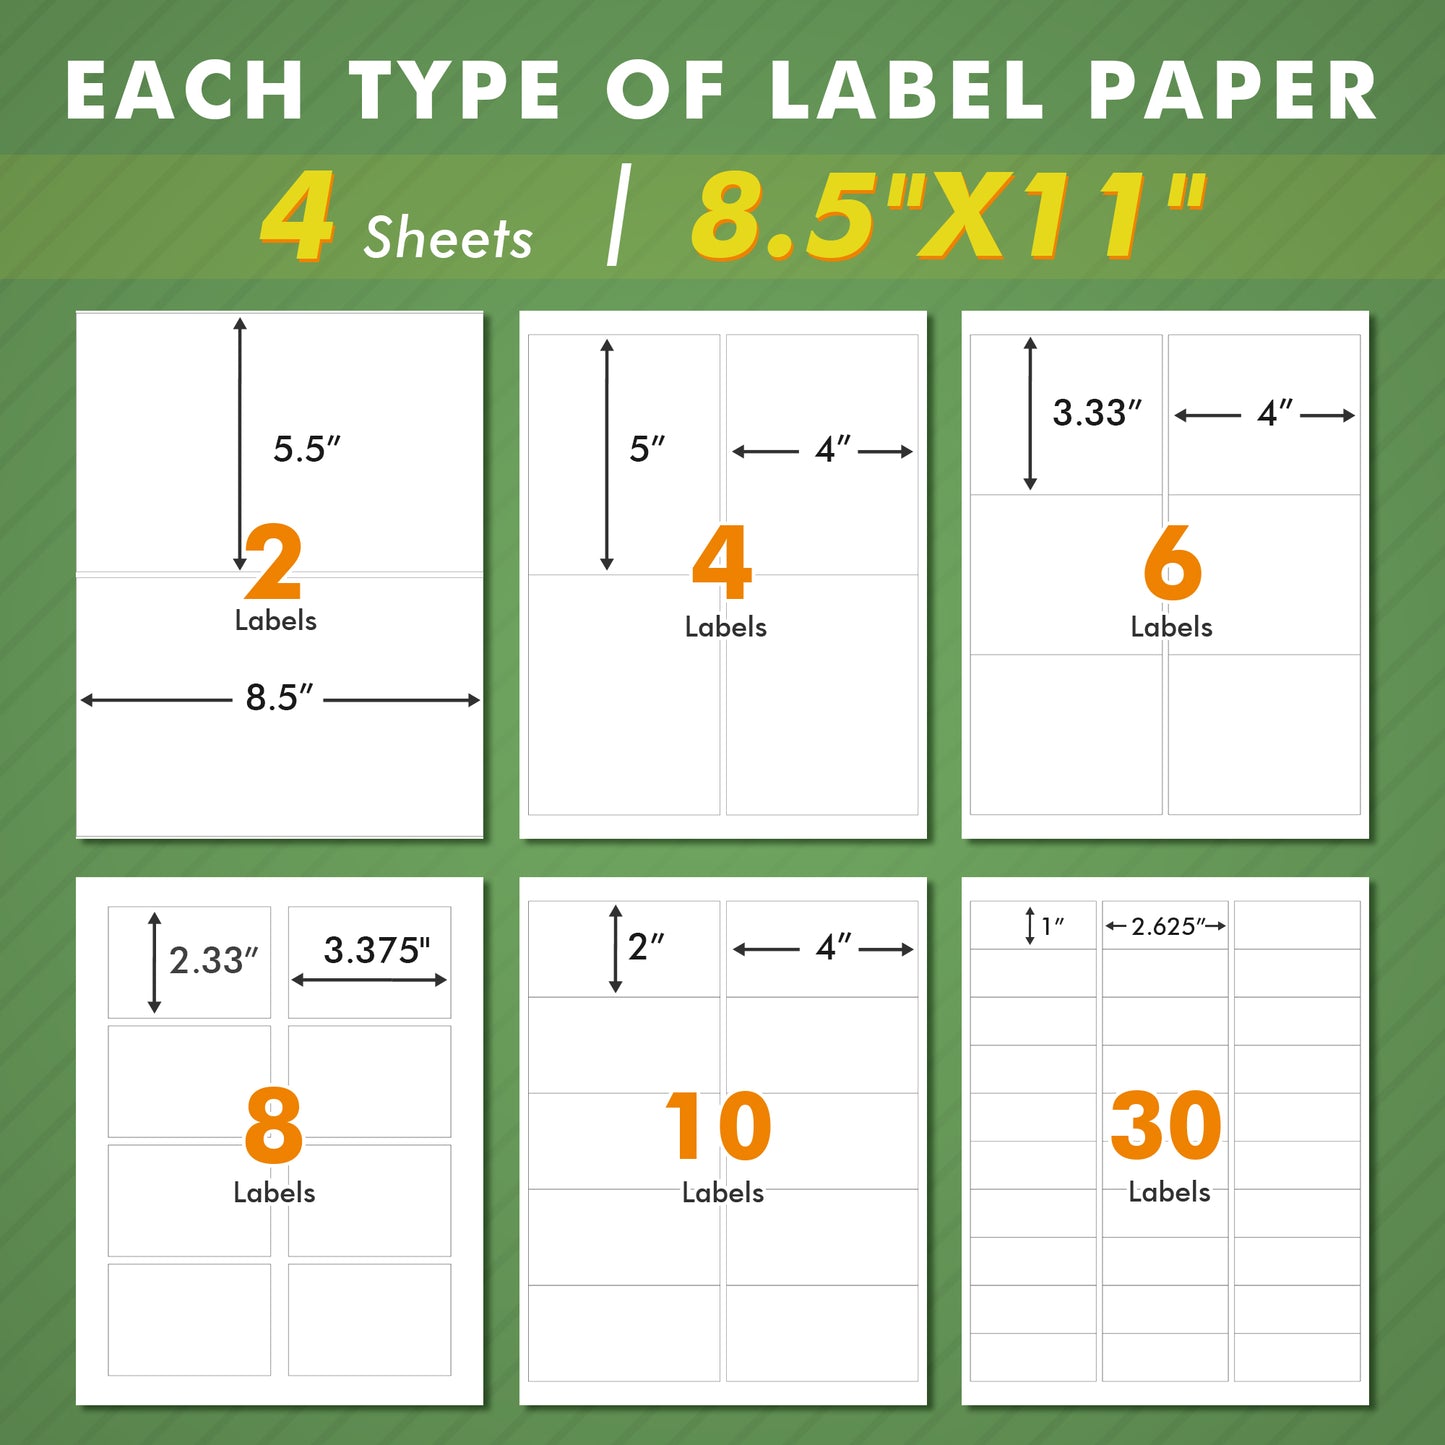 Koala Trial Pack Shipping Address Labels 24 Sheets for Laser & Inkjet Printers 8.5x11 inches